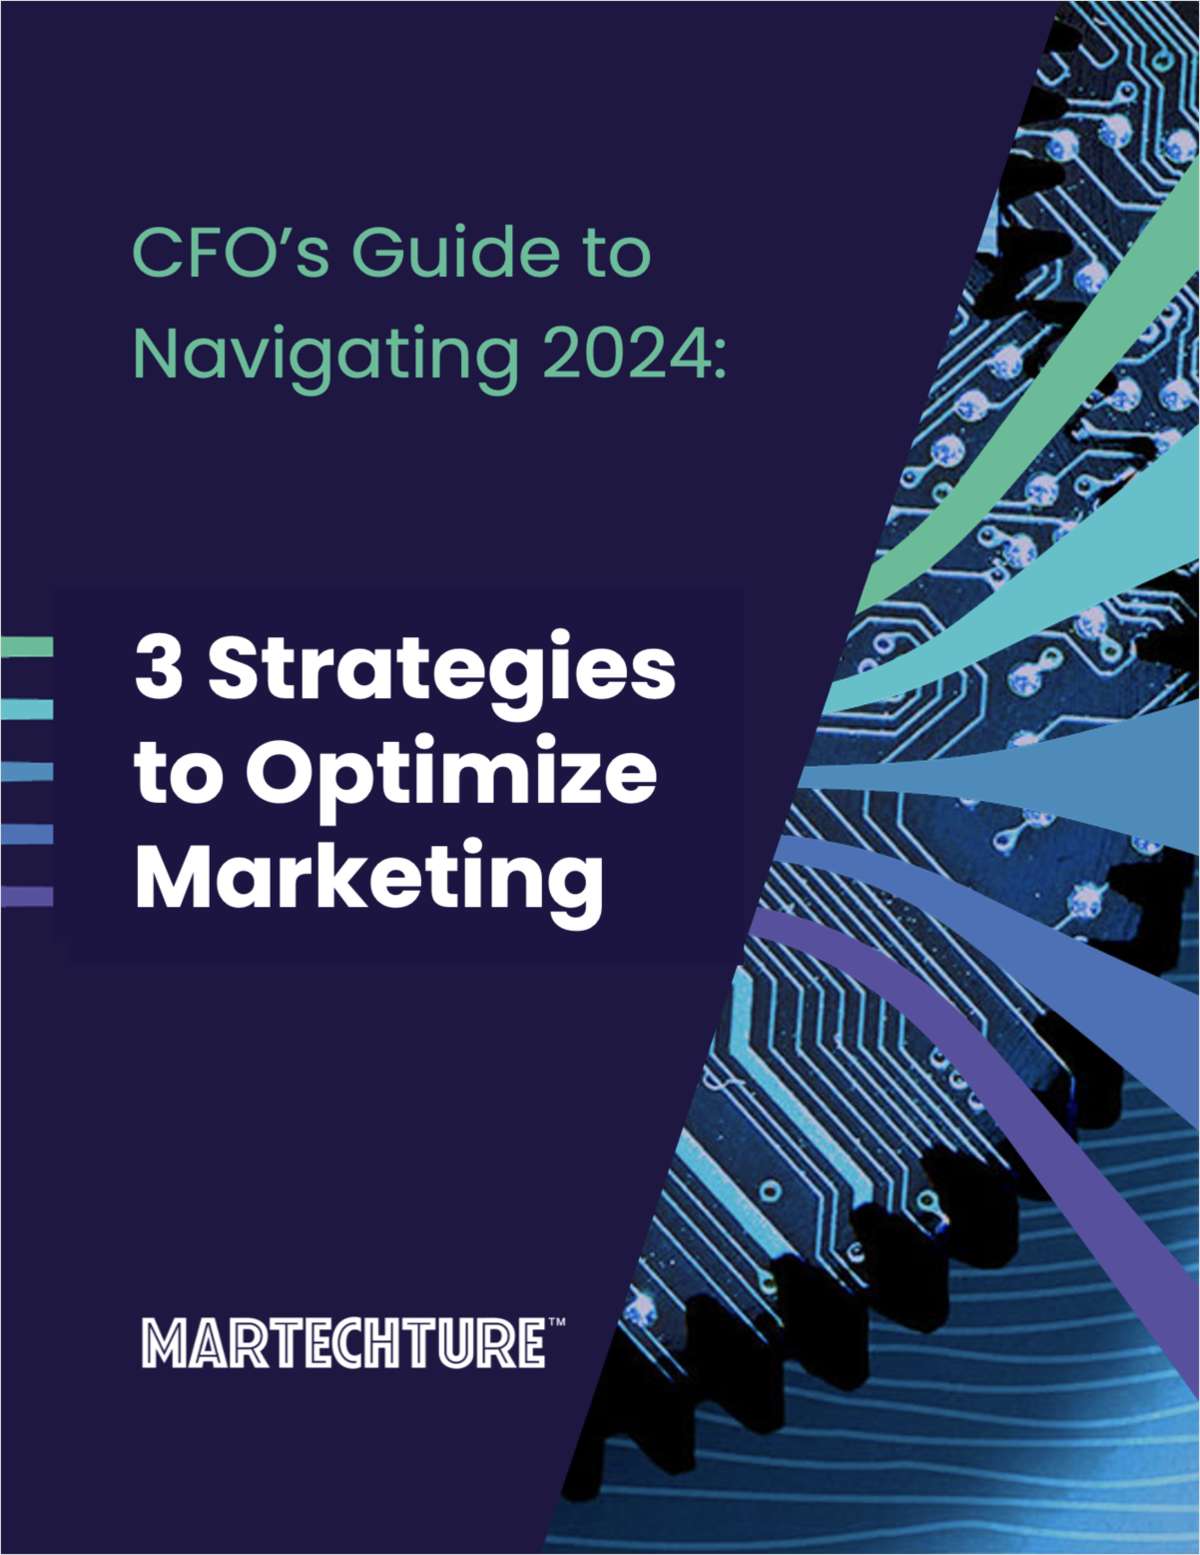 CFO's Guide to Navigating 2024: 3 Strategies to Optimize Marketing